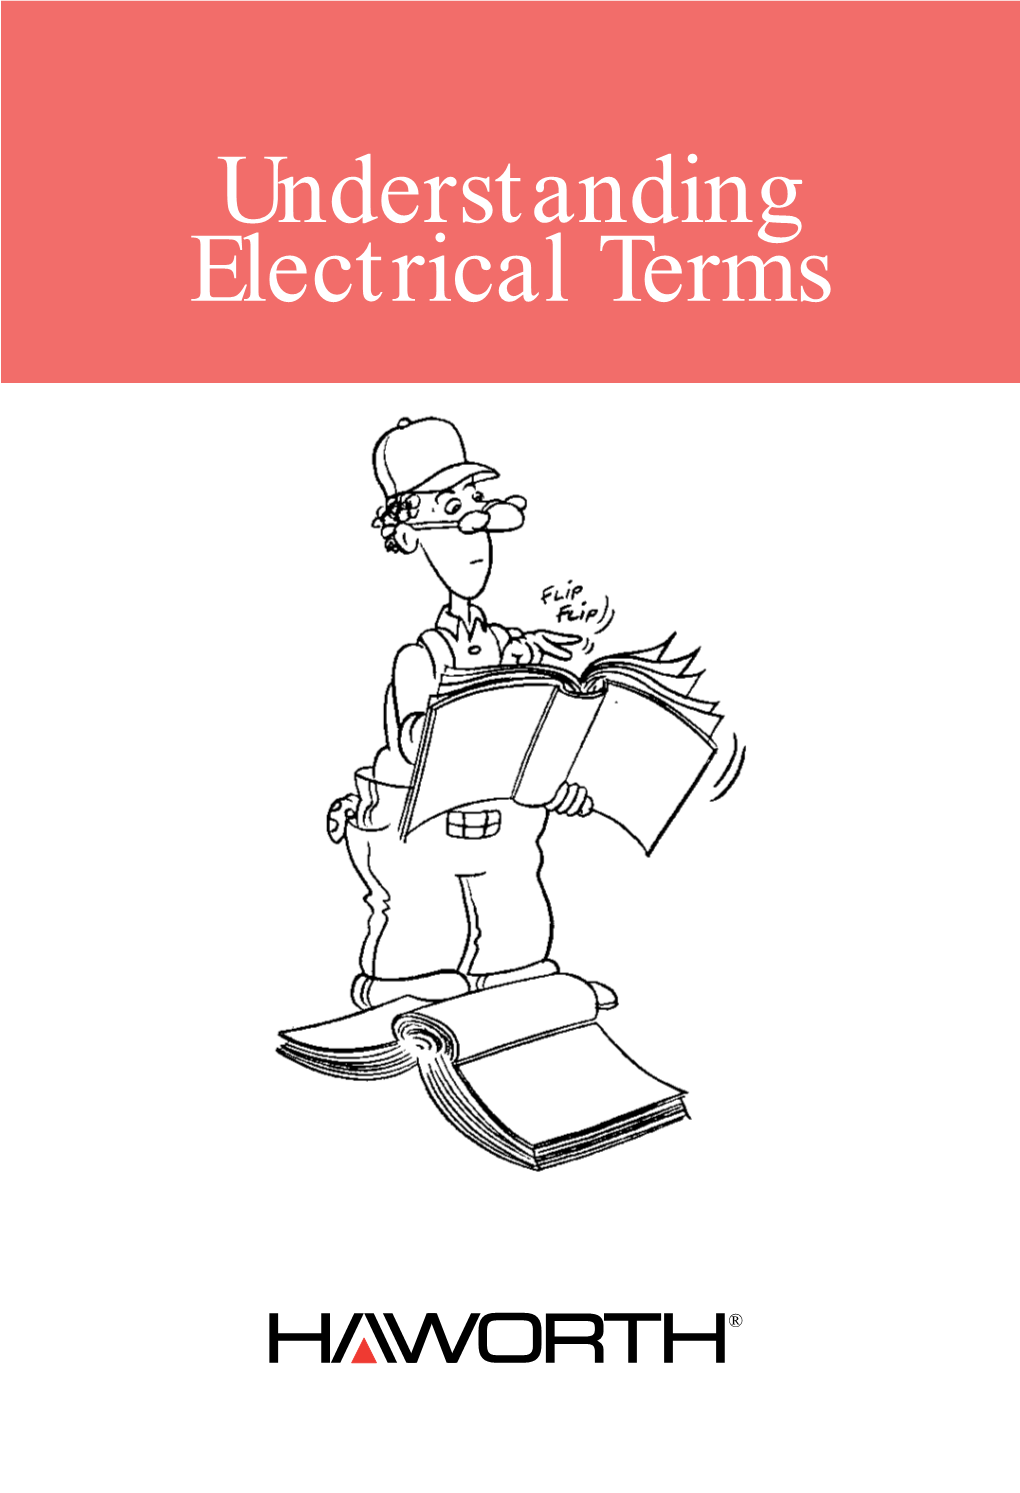 Understanding Electrical Terms